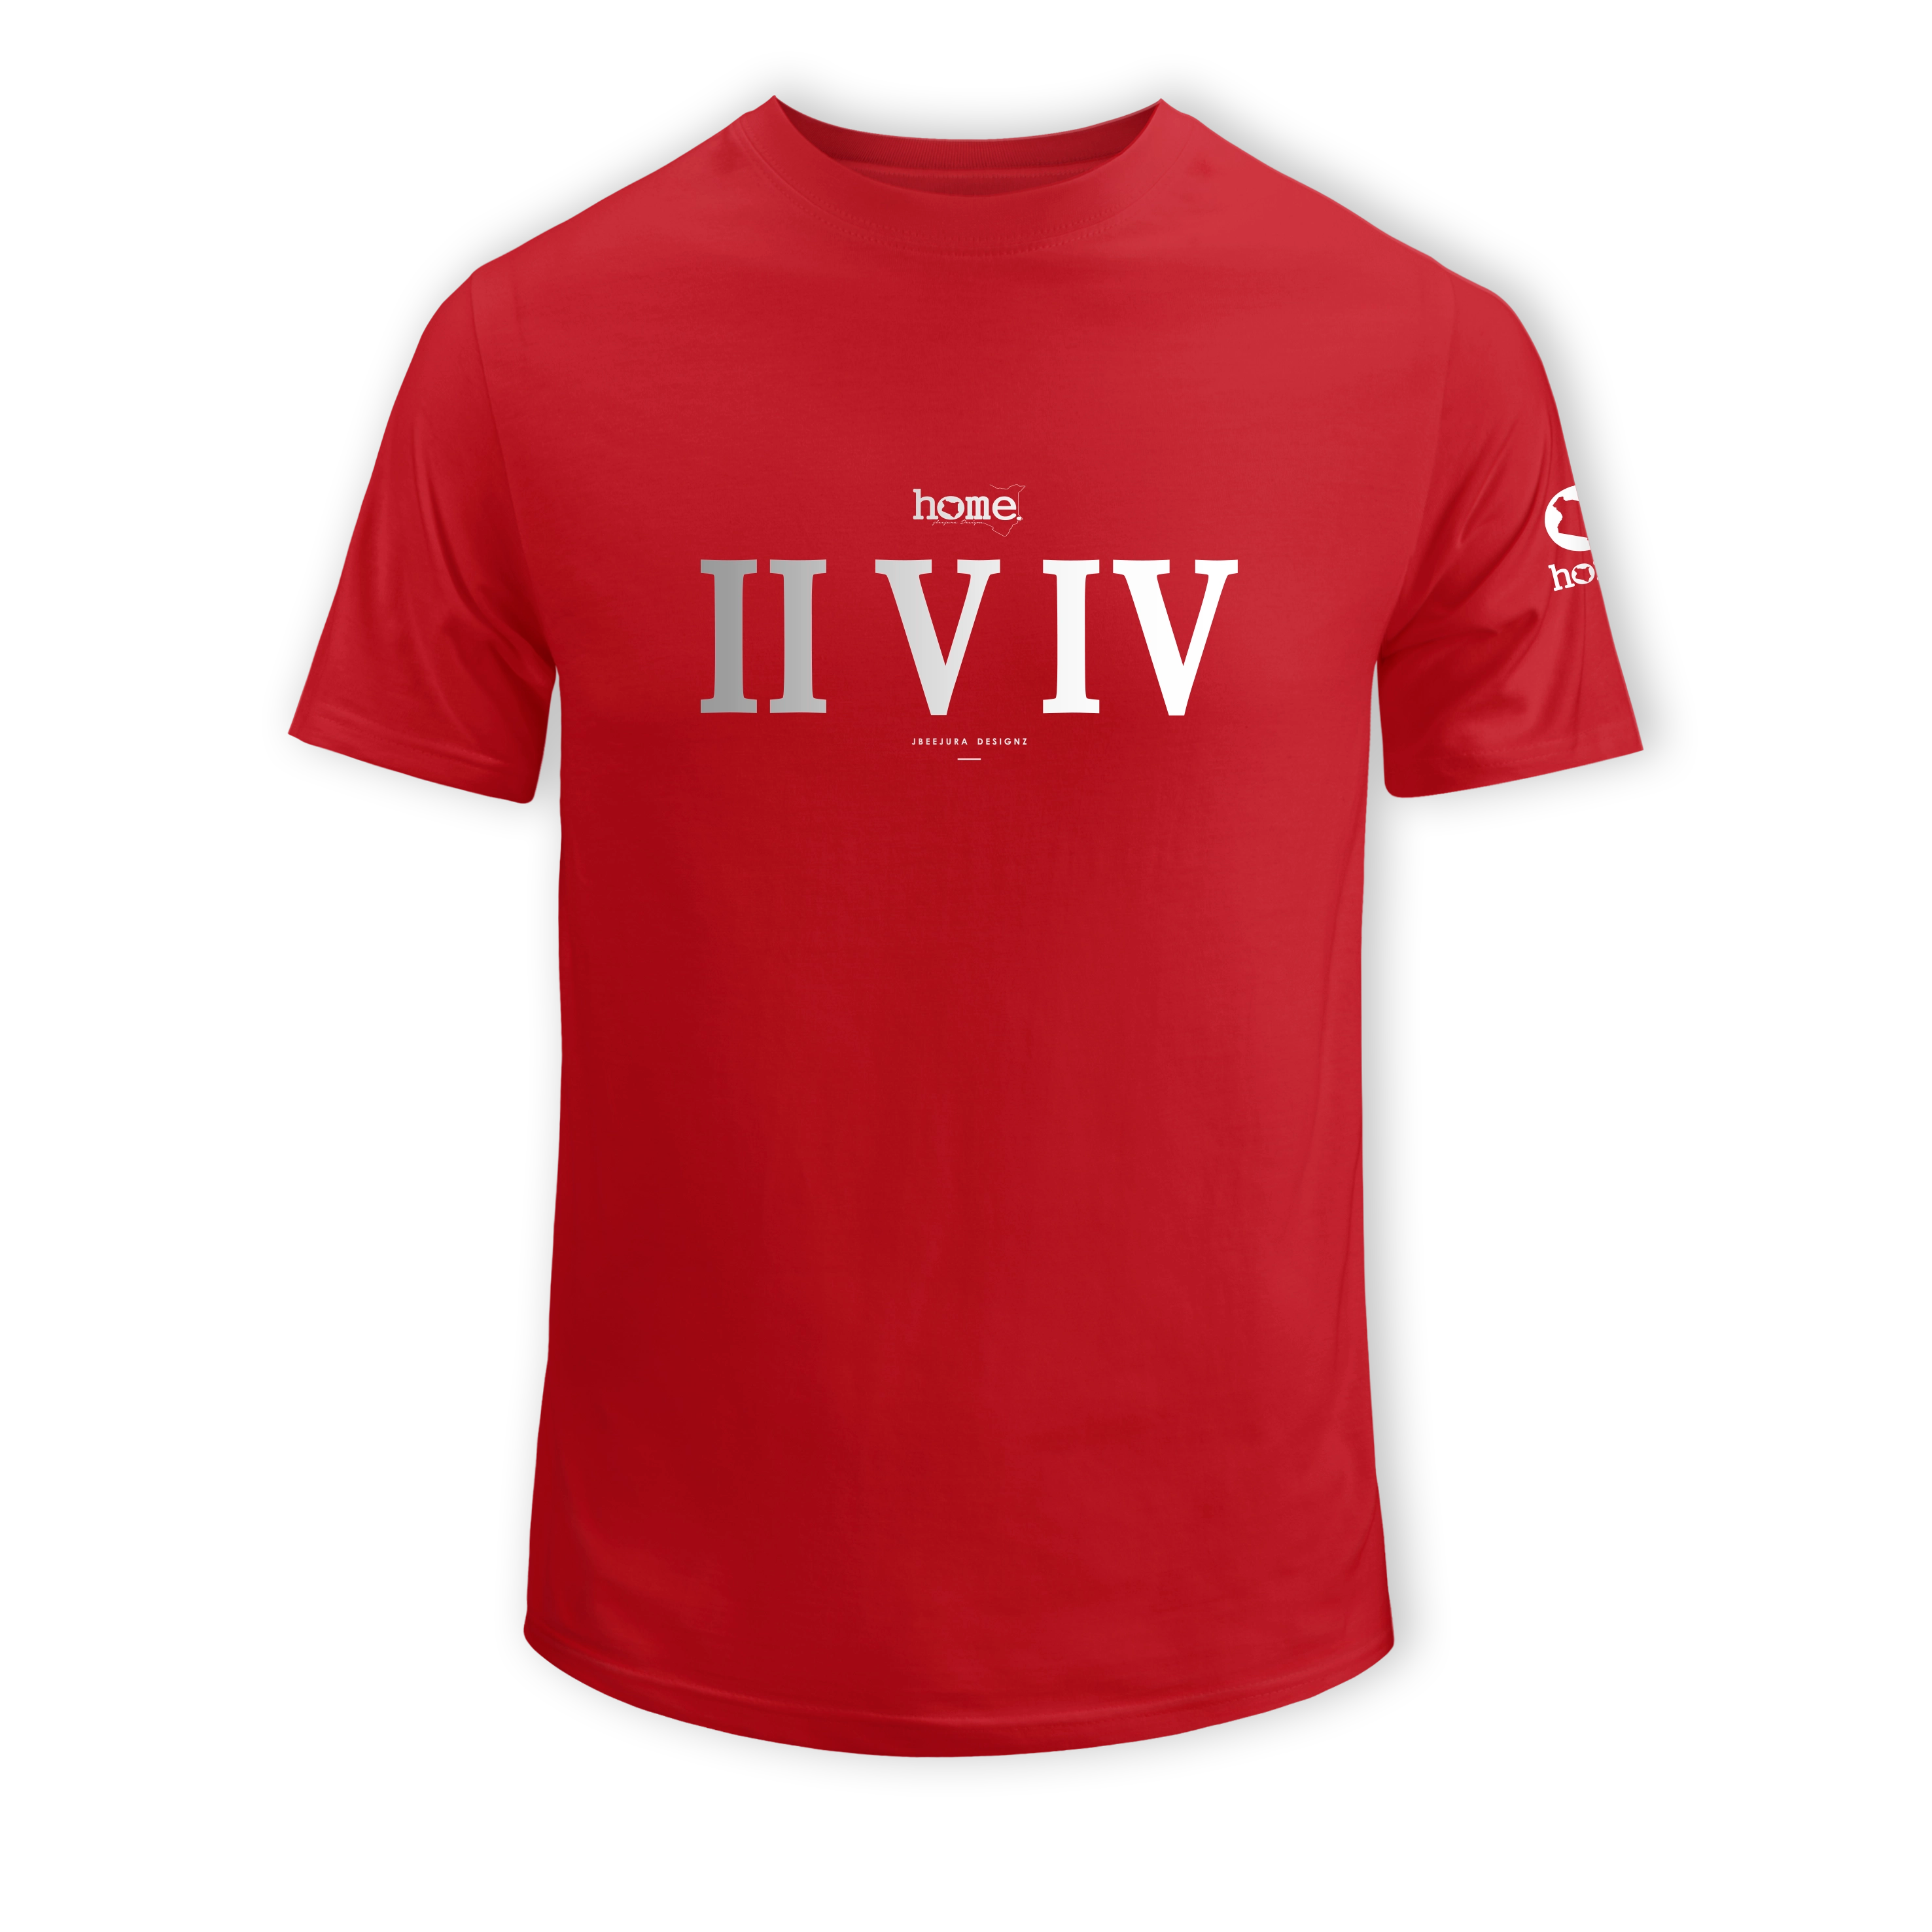 home_254 KIDS SHORT-SLEEVED RED T-SHIRT WITH A SILVER ROMAN NUMERALS PRINT – COTTON PLUS FABRIC